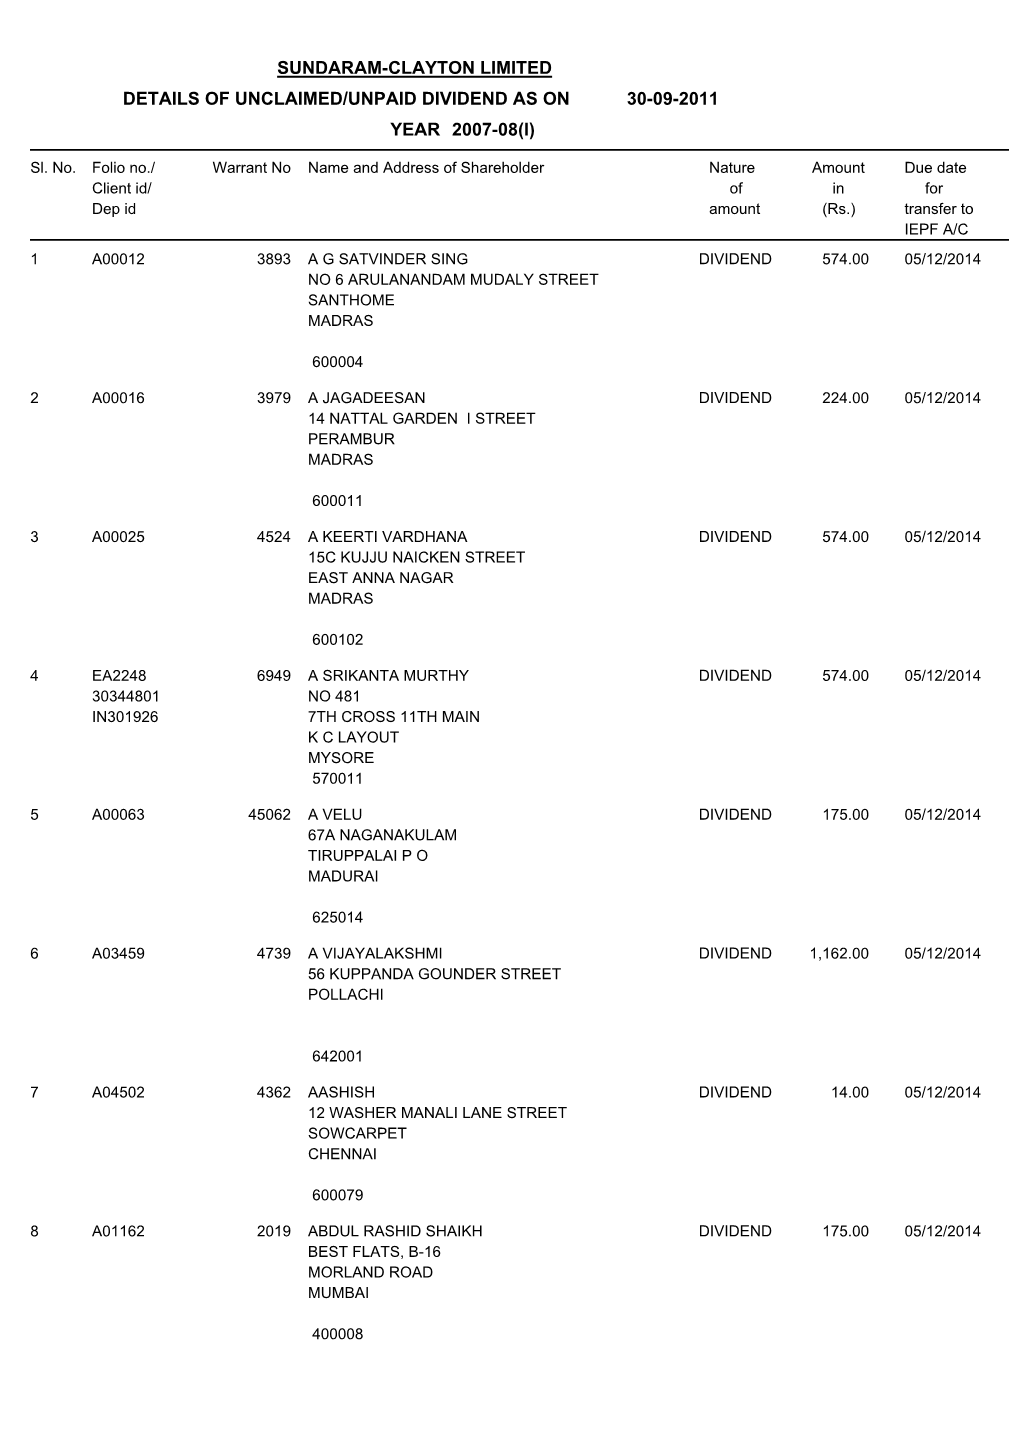 Sundaram-Clayton Limited Details of Unclaimed/Unpaid Dividend As on 30-09-2011 Year 2007-08(I)